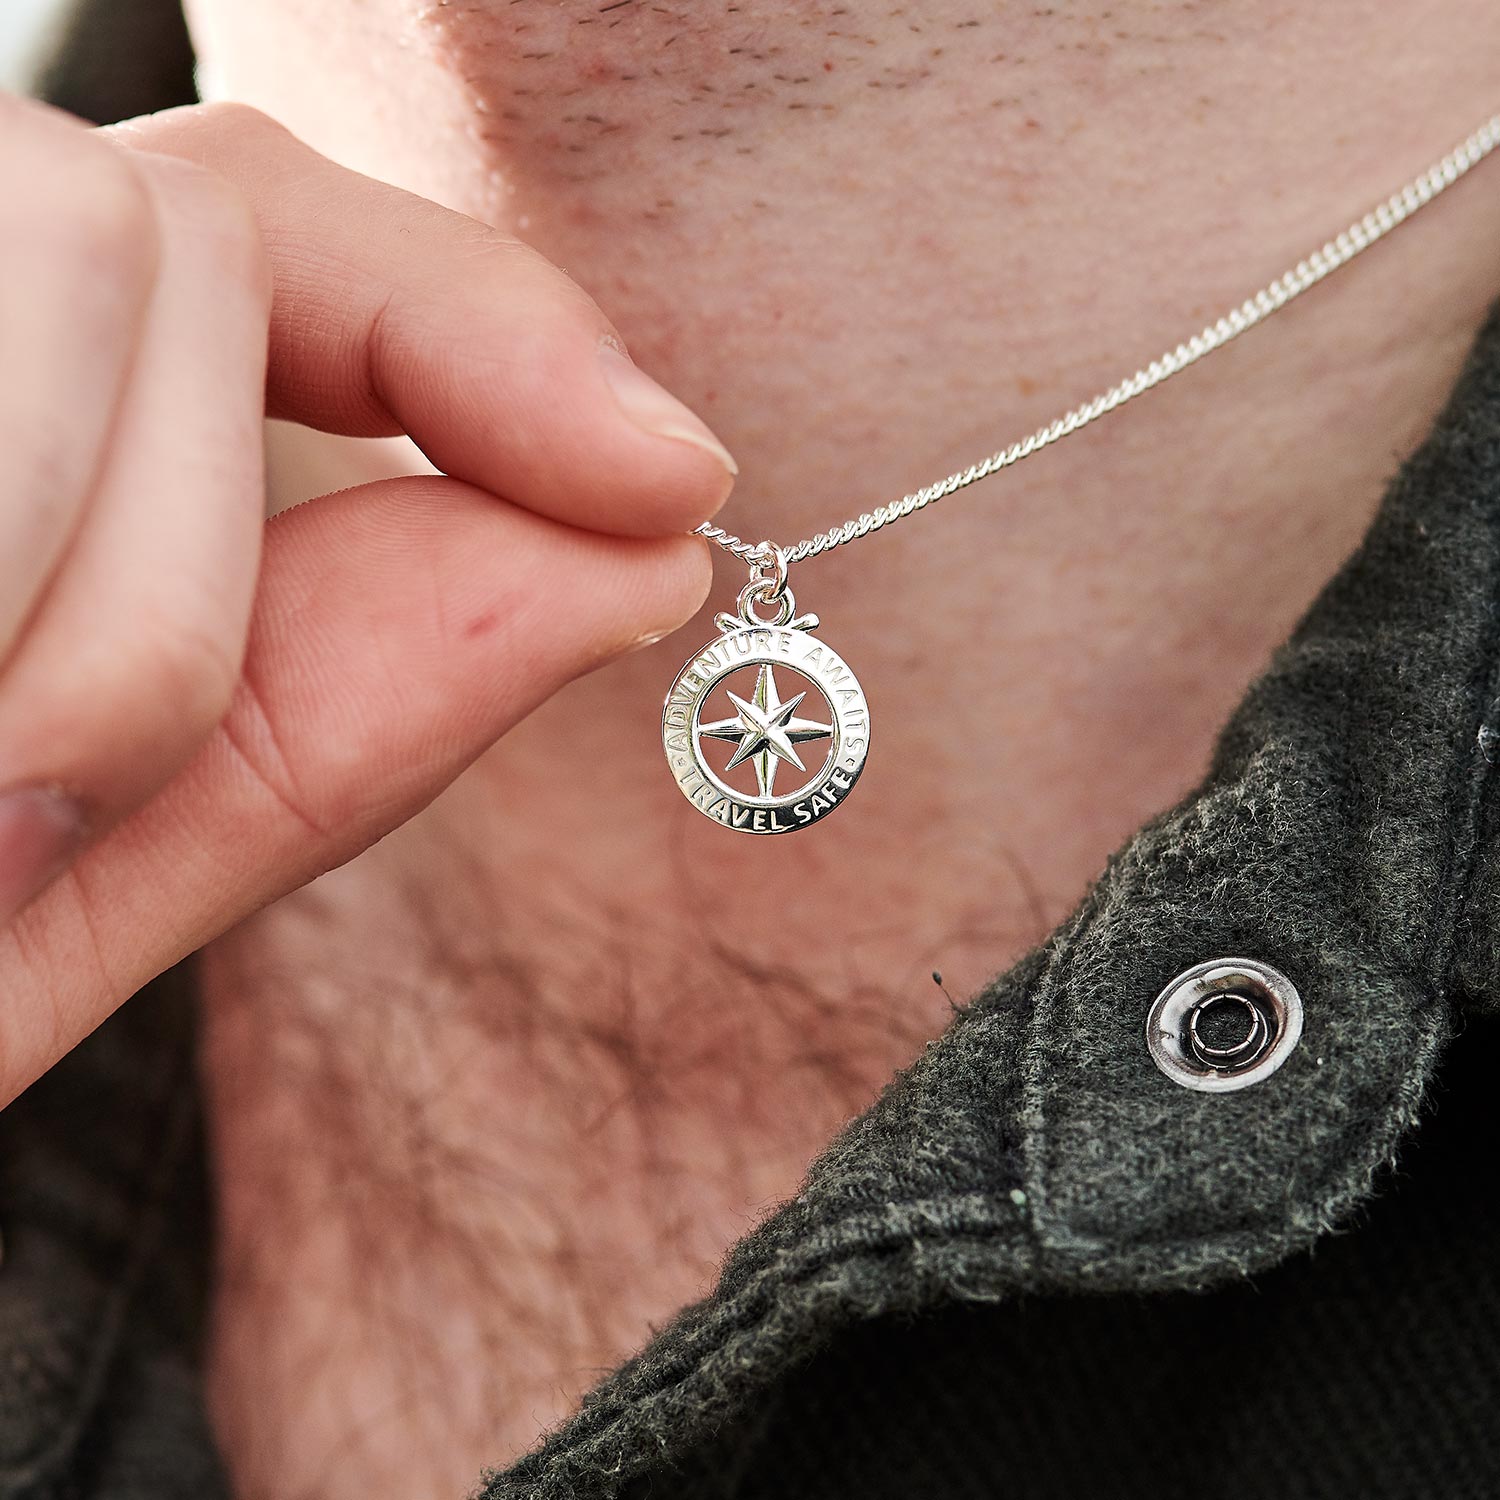 Small men's compass necklace travel gift from Off The Map Jewellery